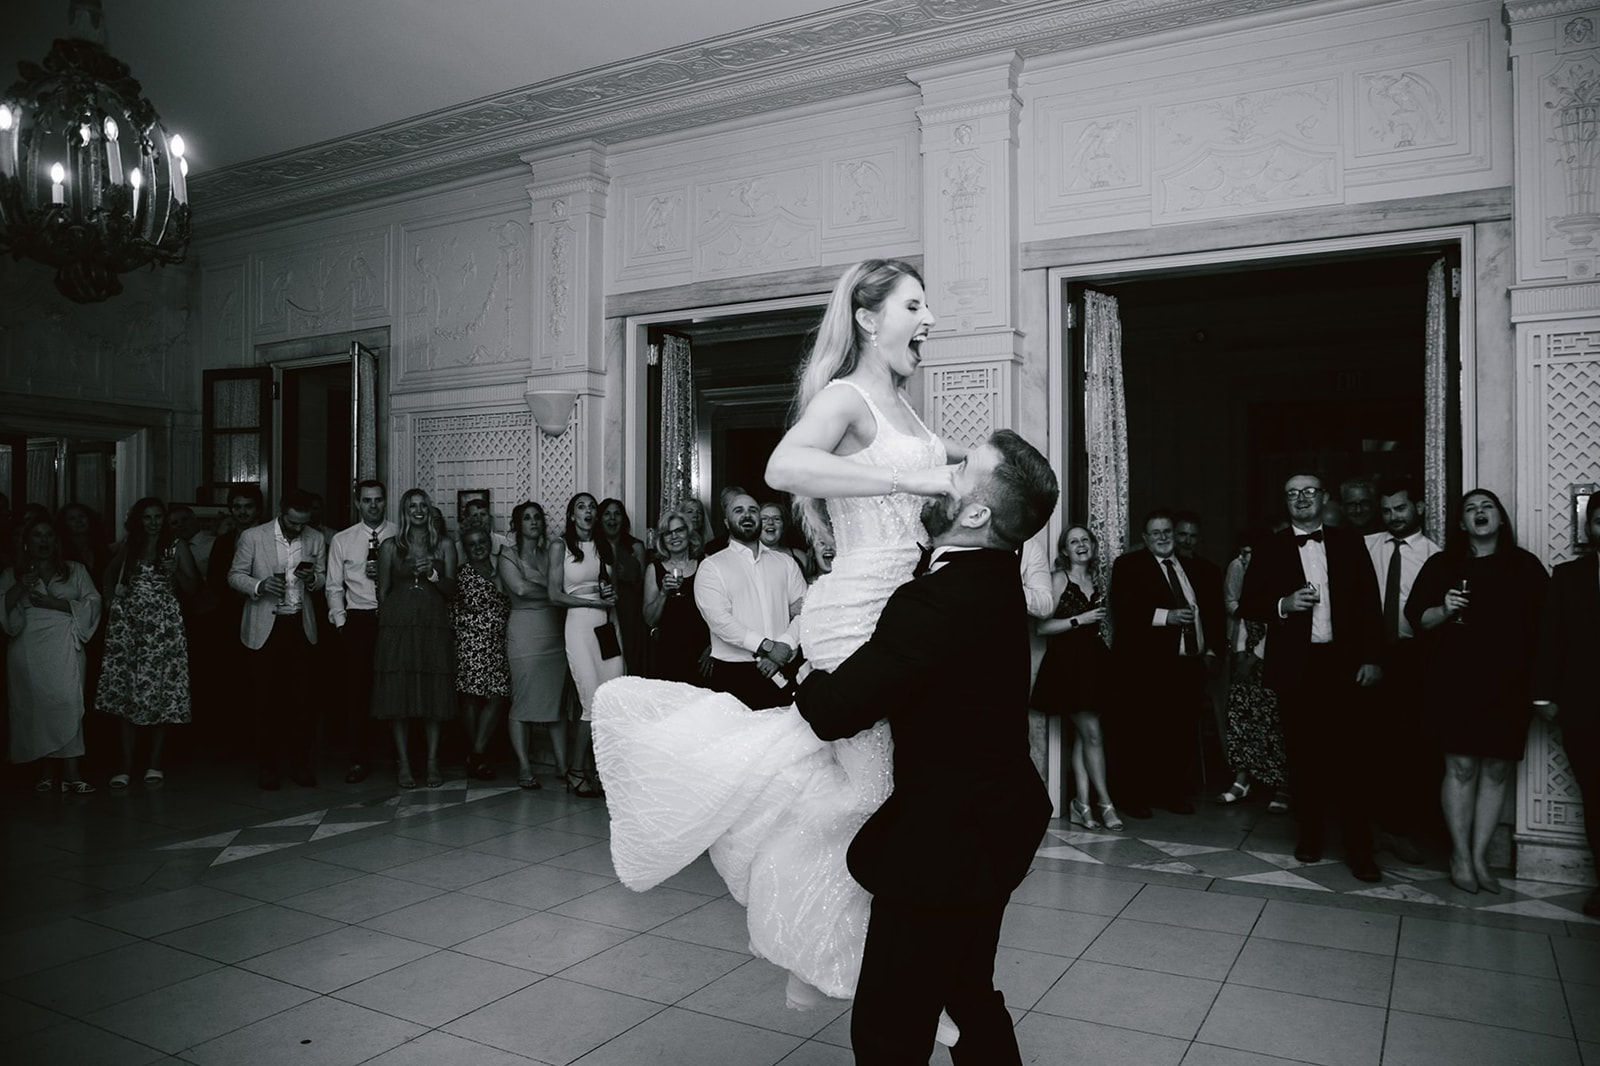 Epic first dance moments at Armour House epitomize the romance and joy of the newlyweds' celebration.